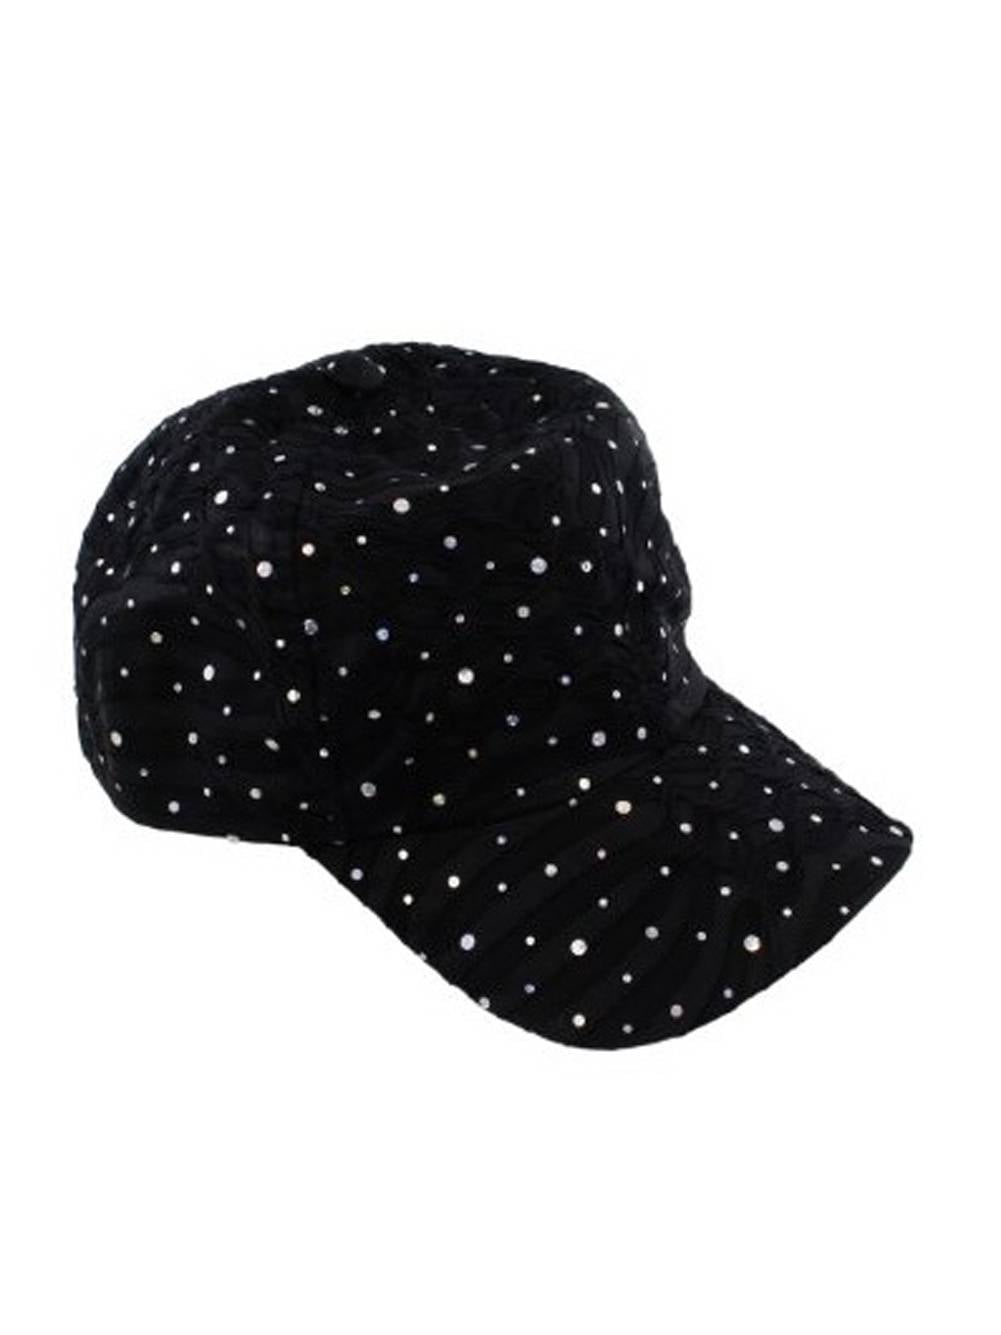 Colorful Abstract Geometric Classic Baseball Cap Men Women Dad Hat Twill Adjustable Size Black